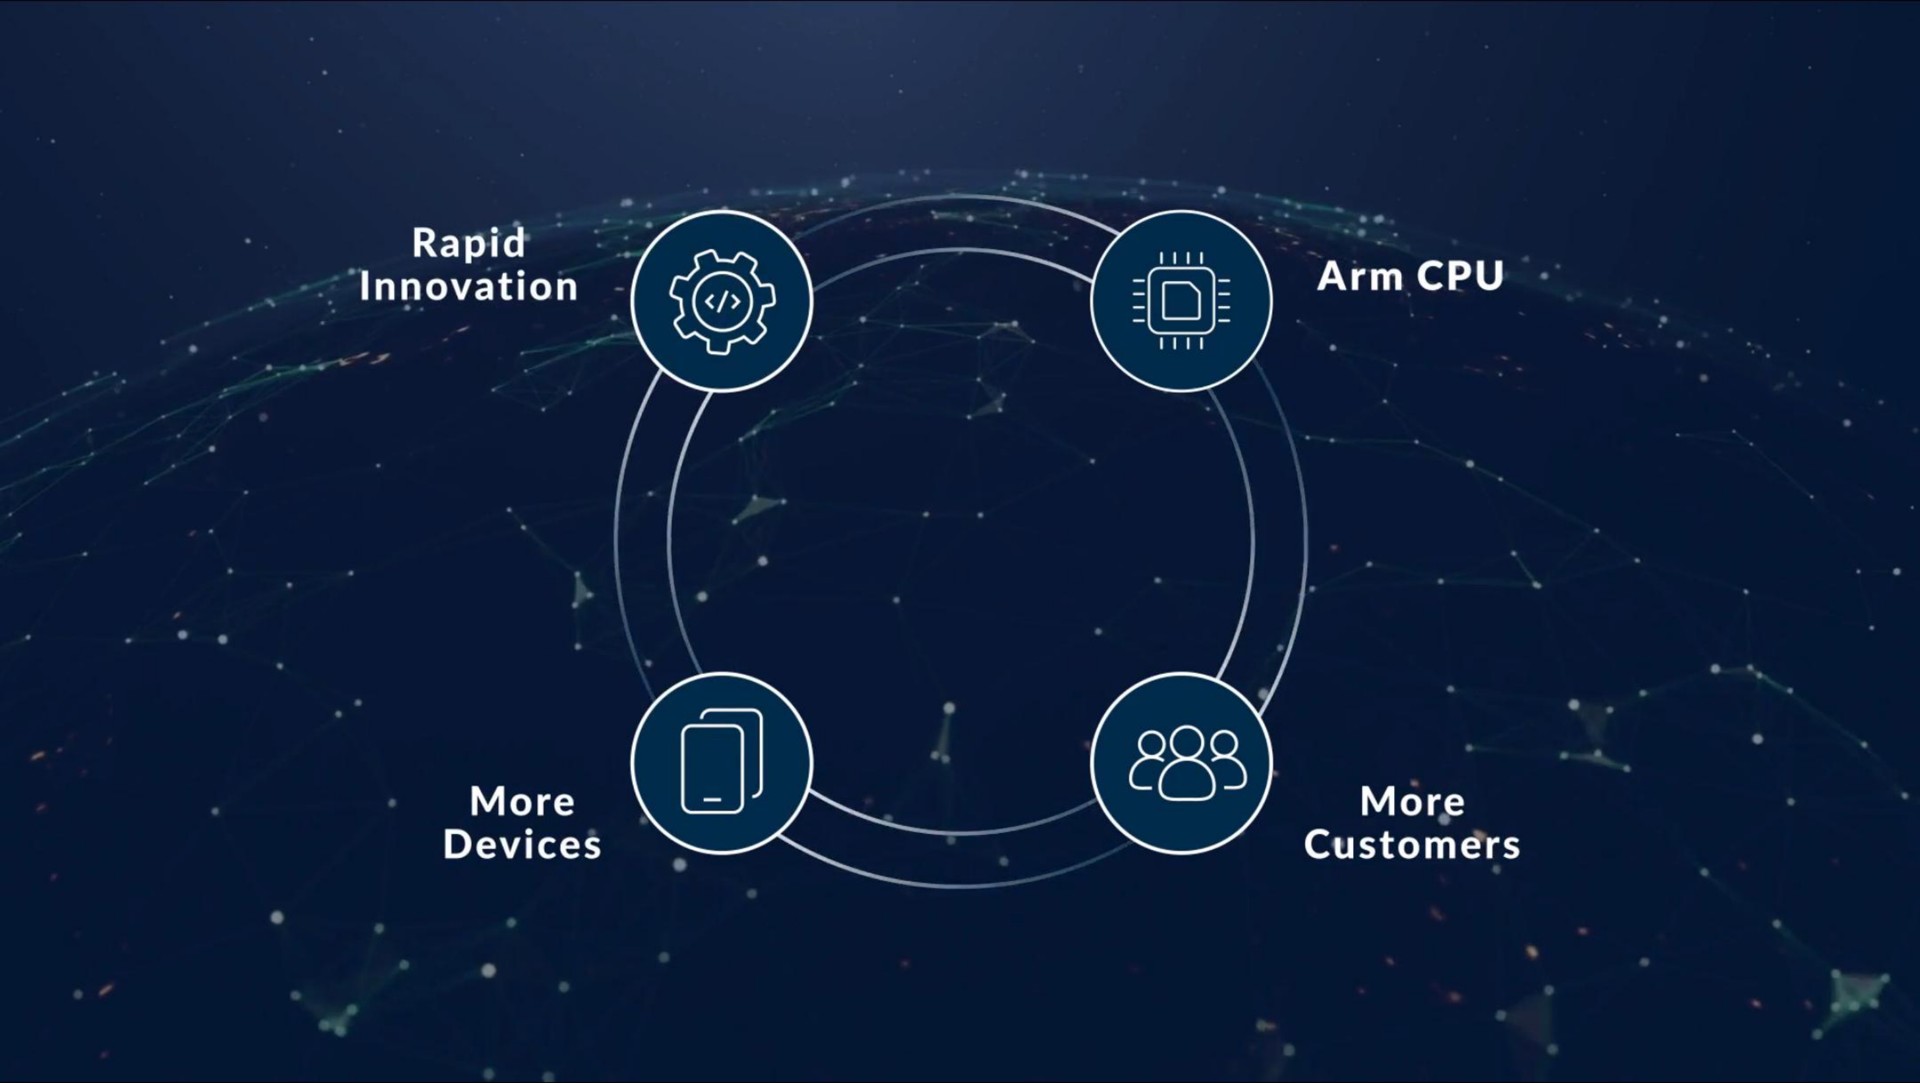 rapid innovation more devices an a more customers | arm